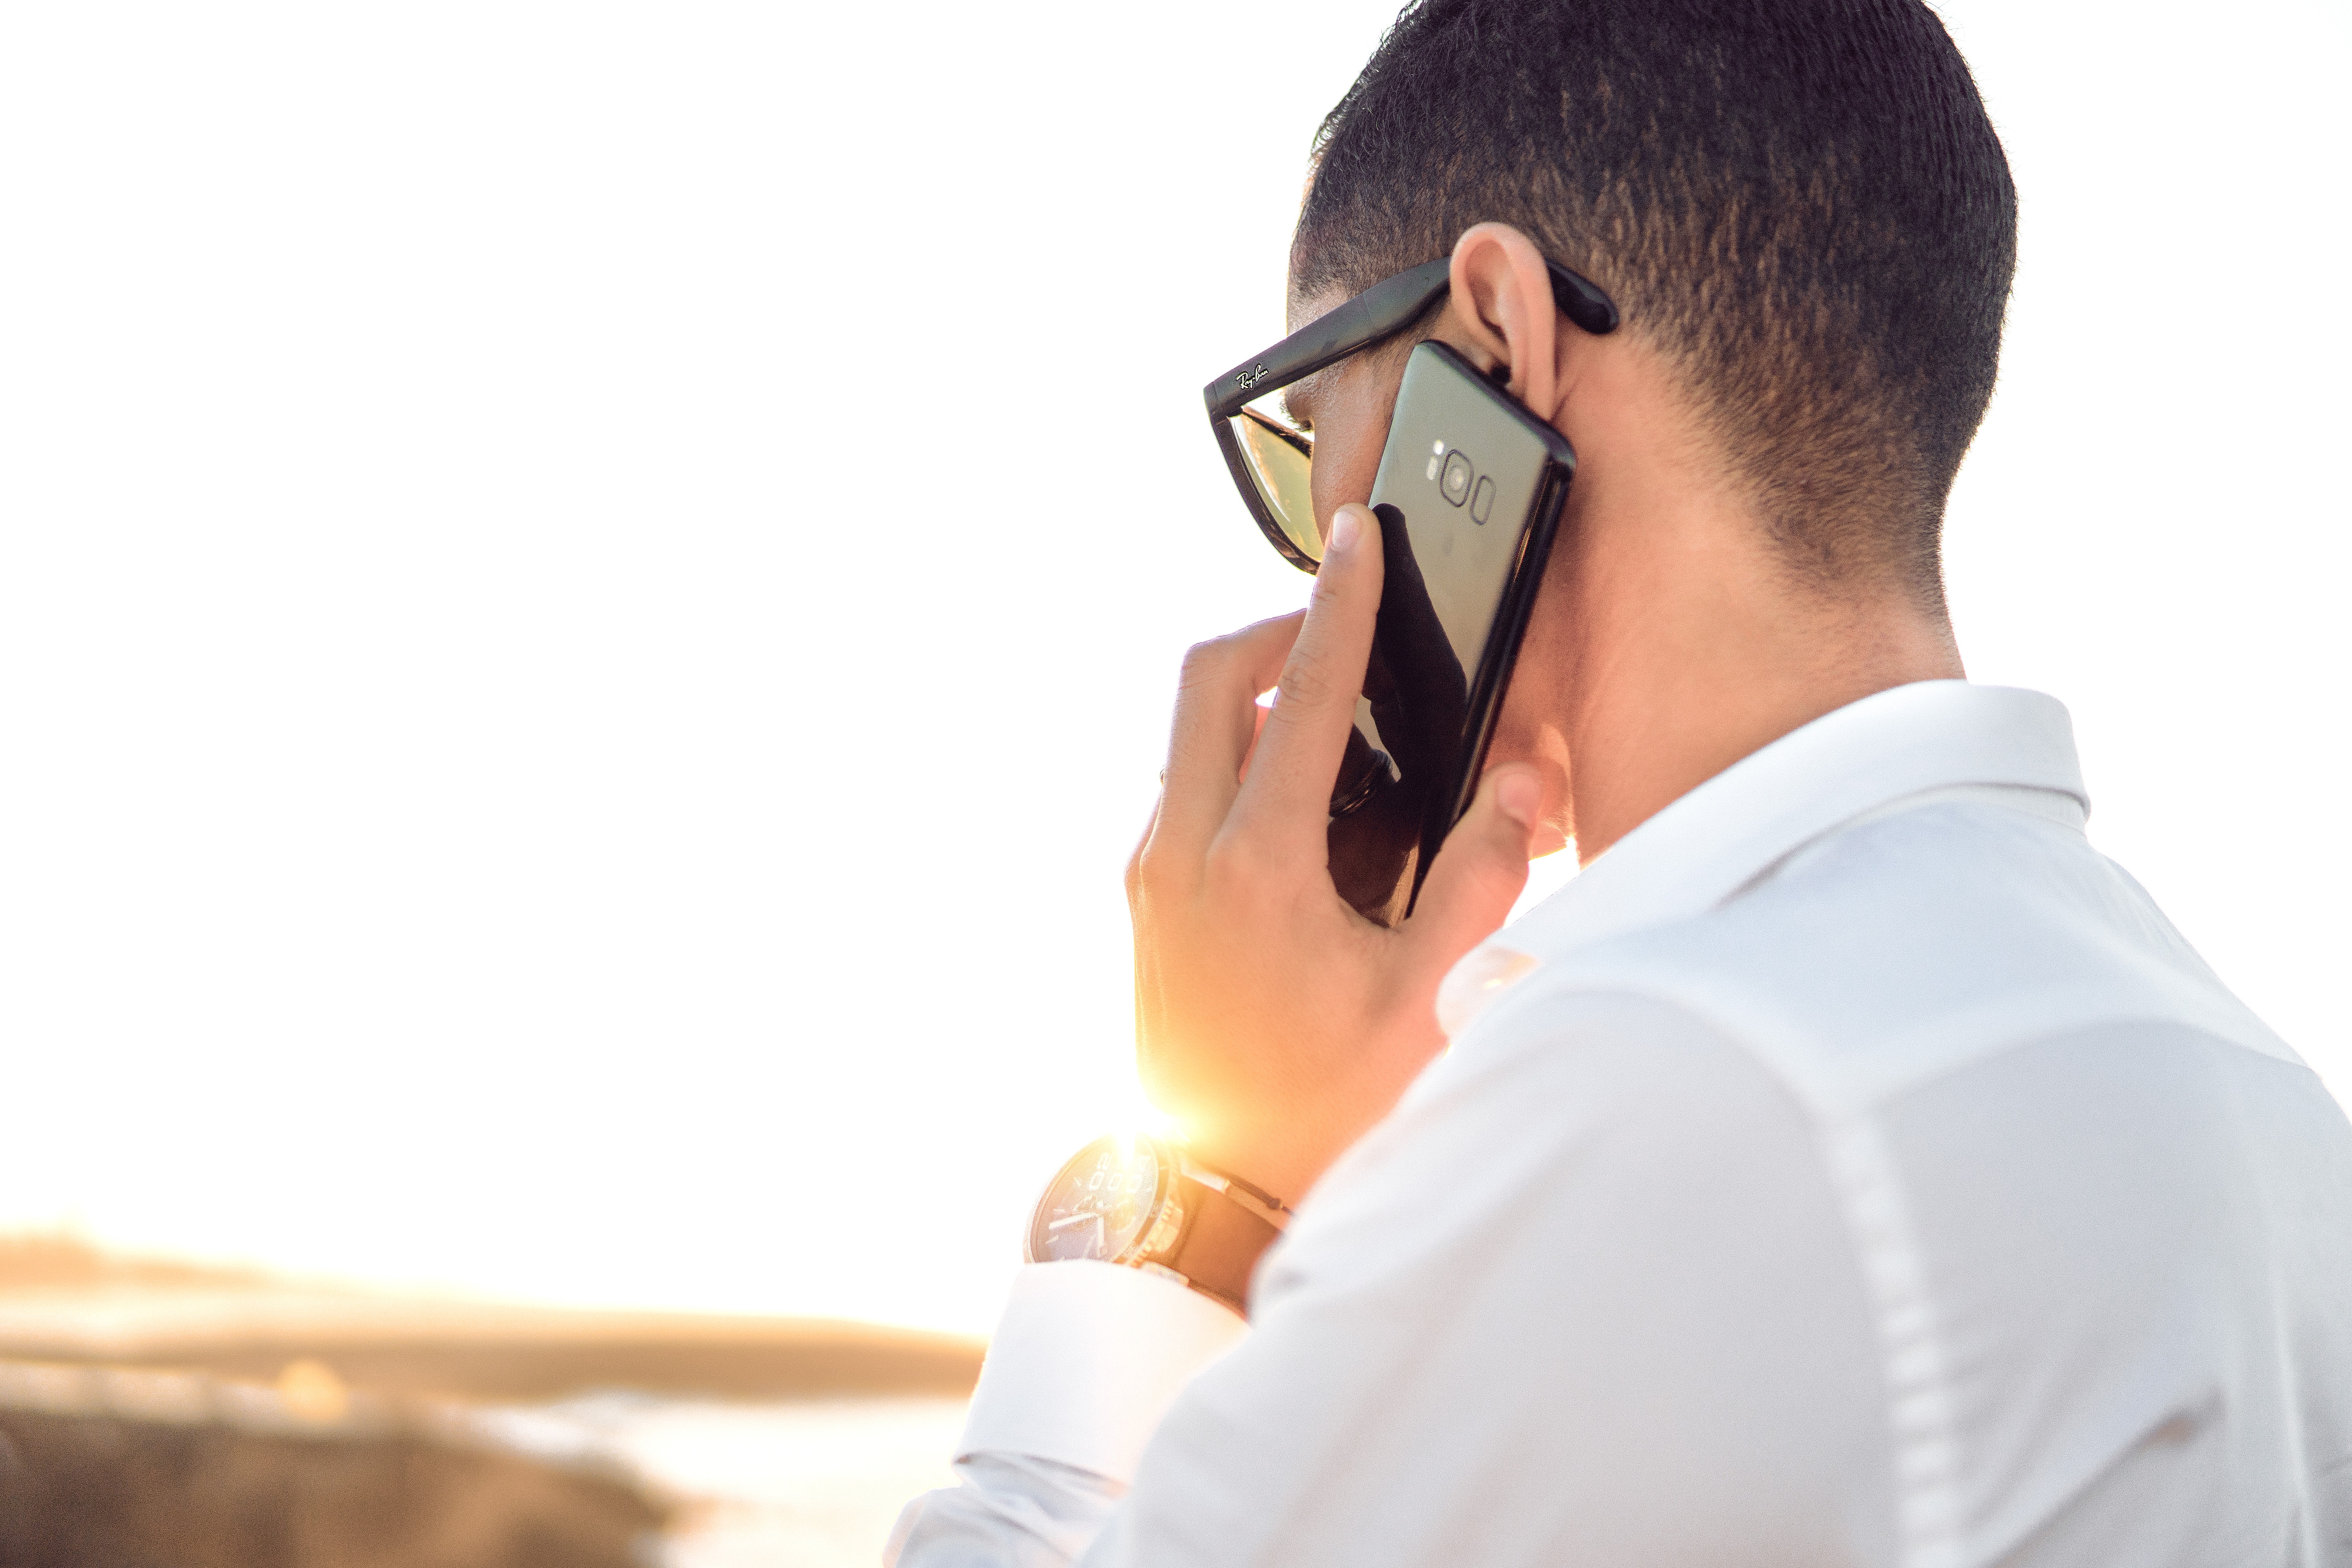 The Best Mobile Network for Your Business: Looking beyond coverage